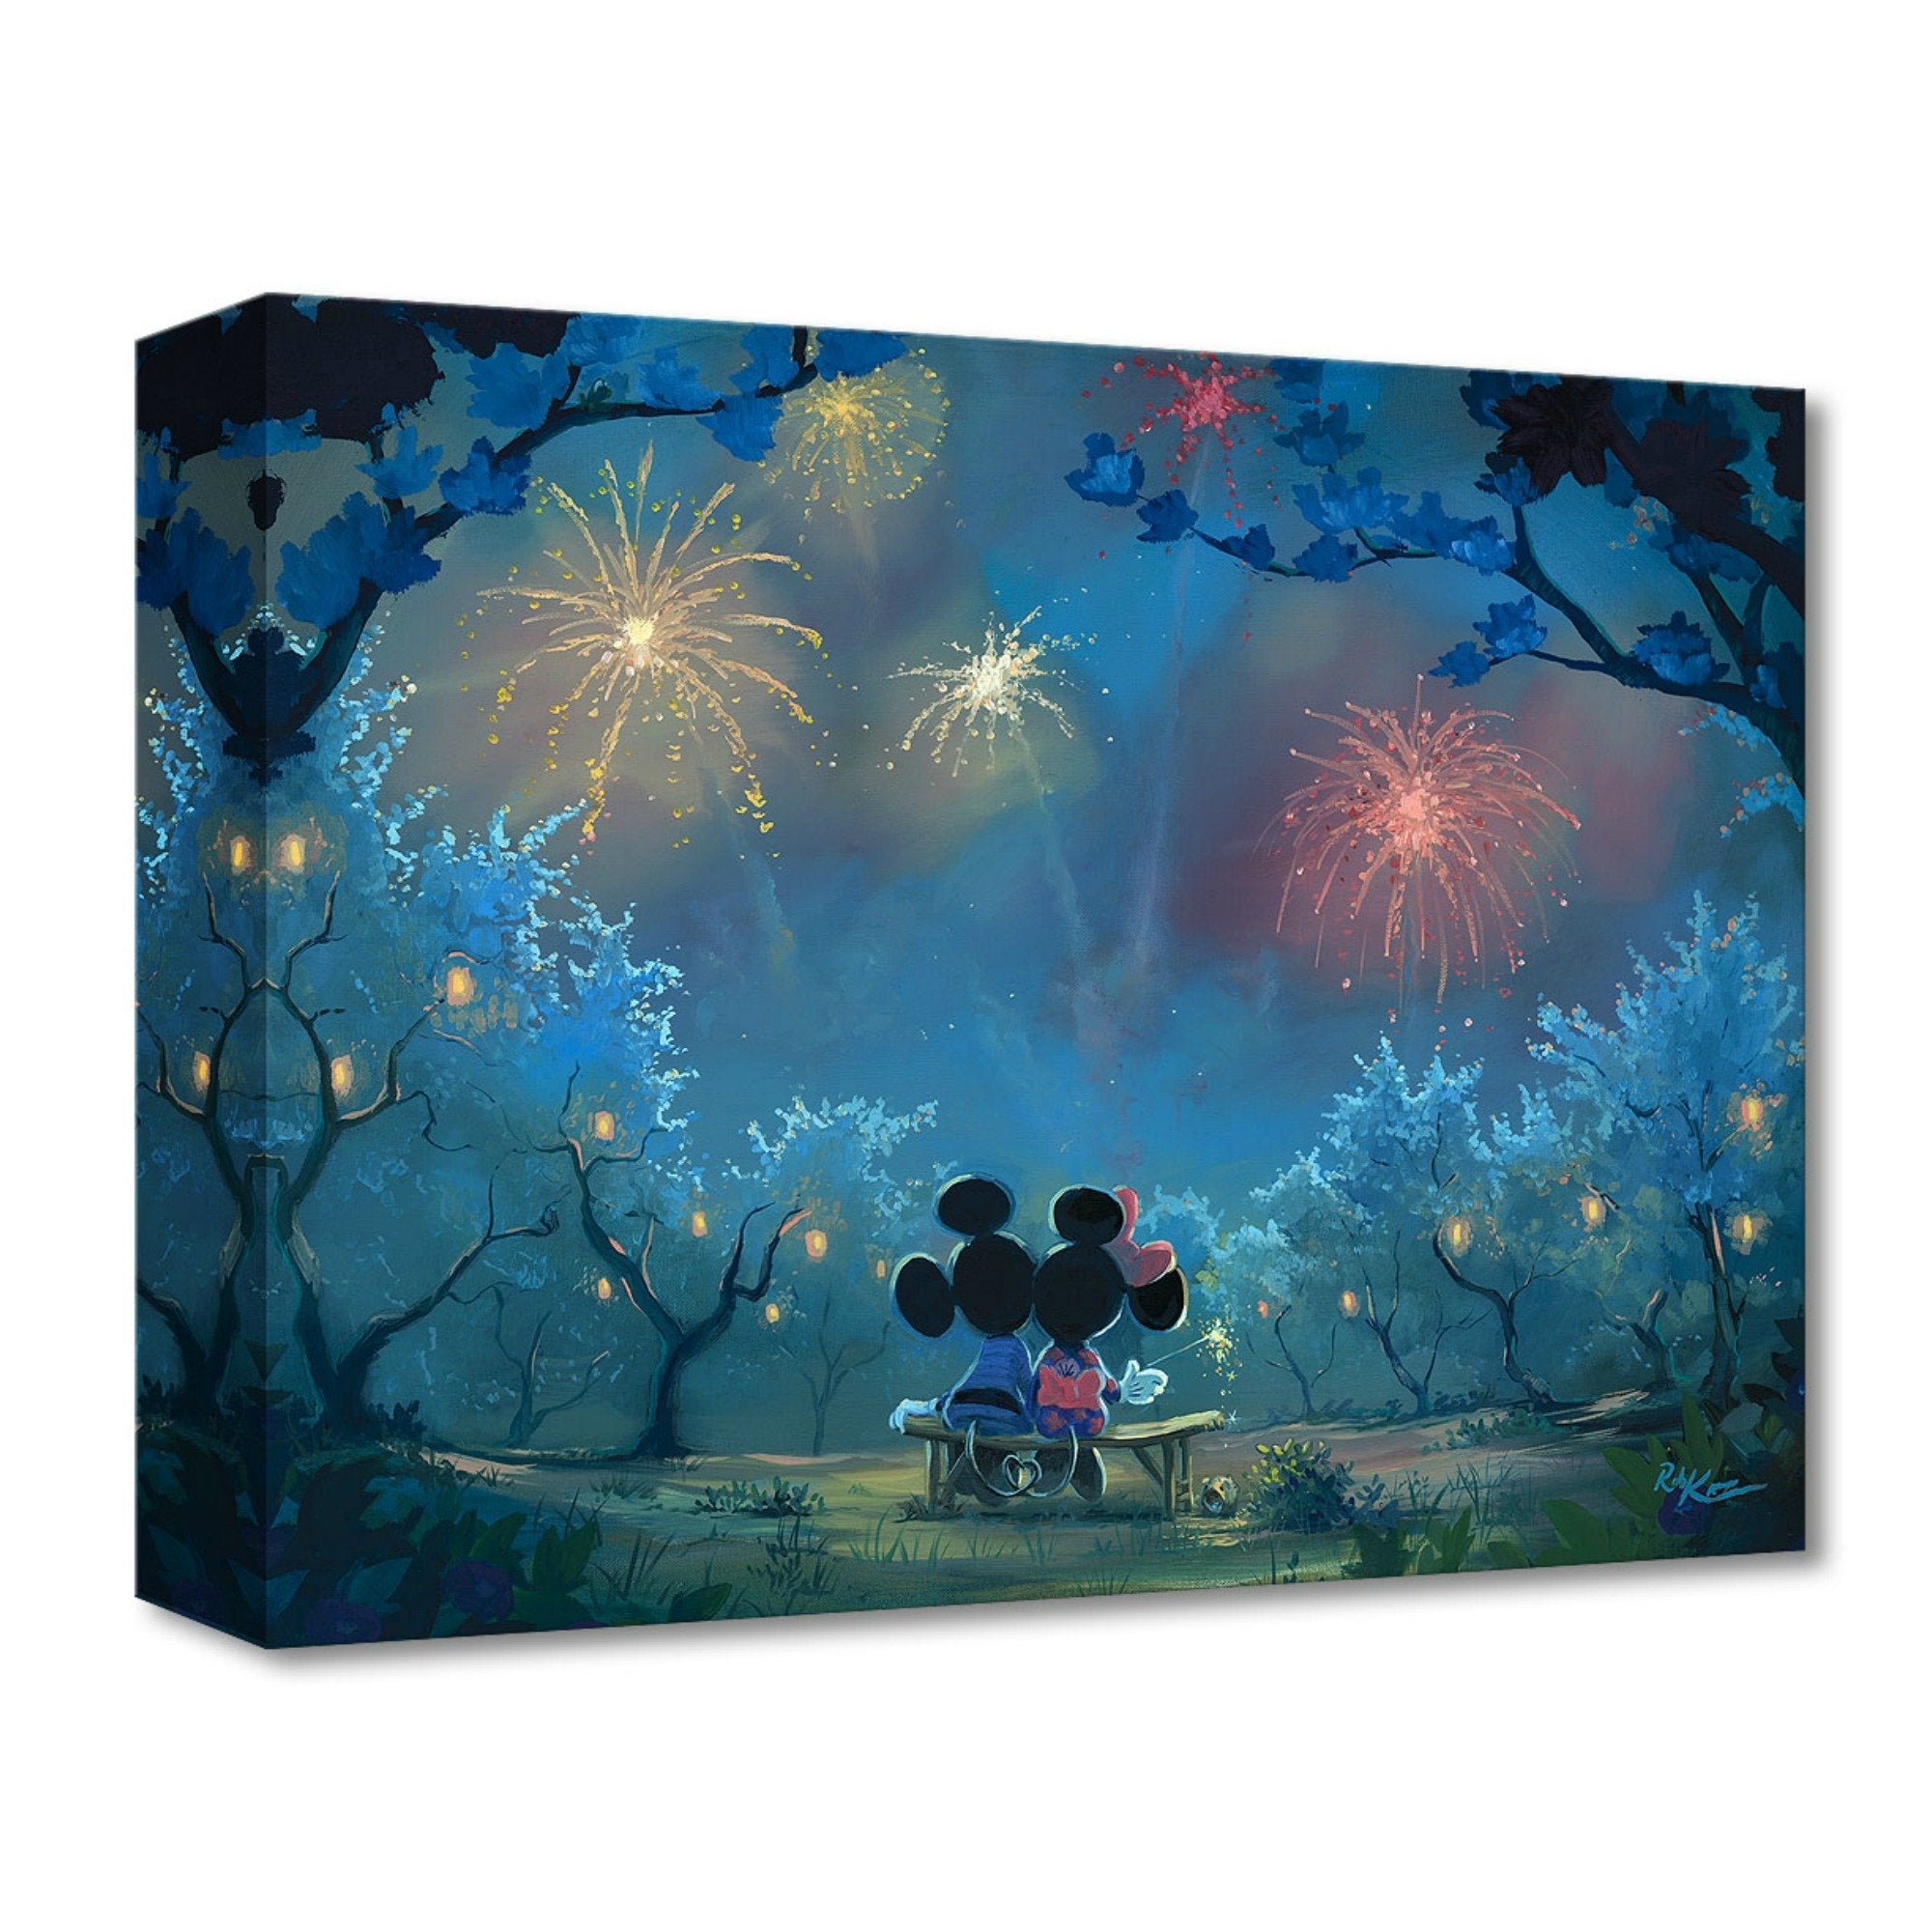 Memories of Summer by Rob Kaz.  Mickey and Minnie sitting on a bench watching the spectacular firework's celebration lighting-up the night sky.